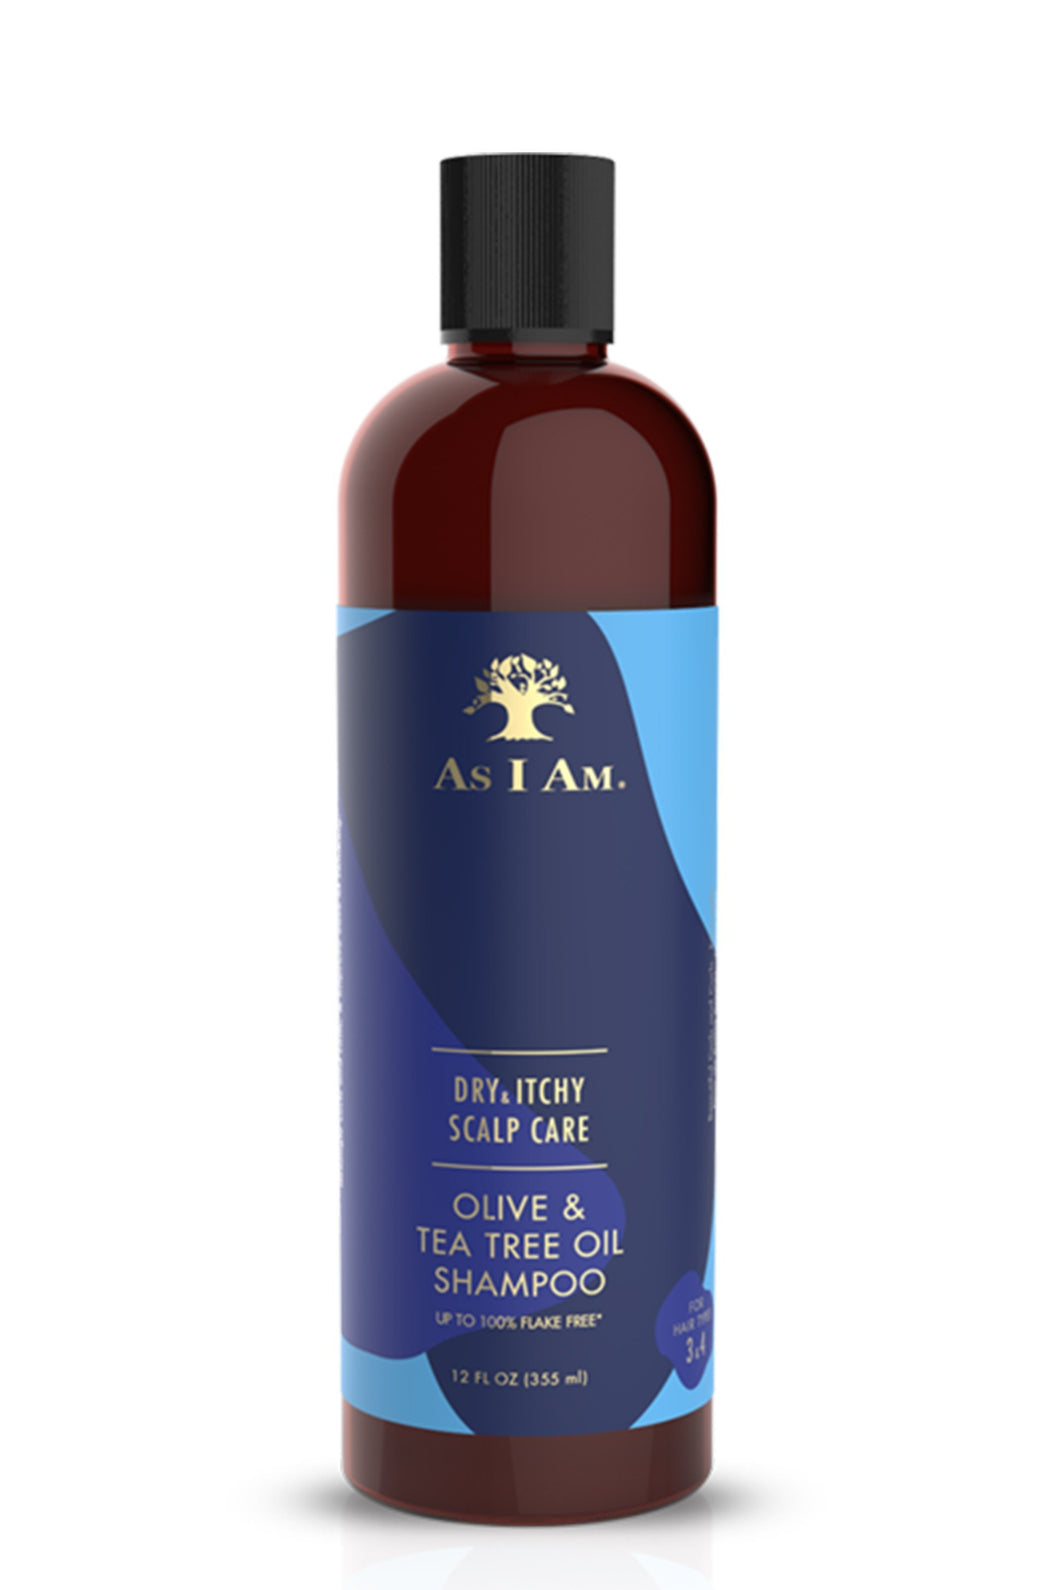 AS I AM Dry and Itchy Scalp Care Olive and Tea Tree Oil Shampoo Product Bottle